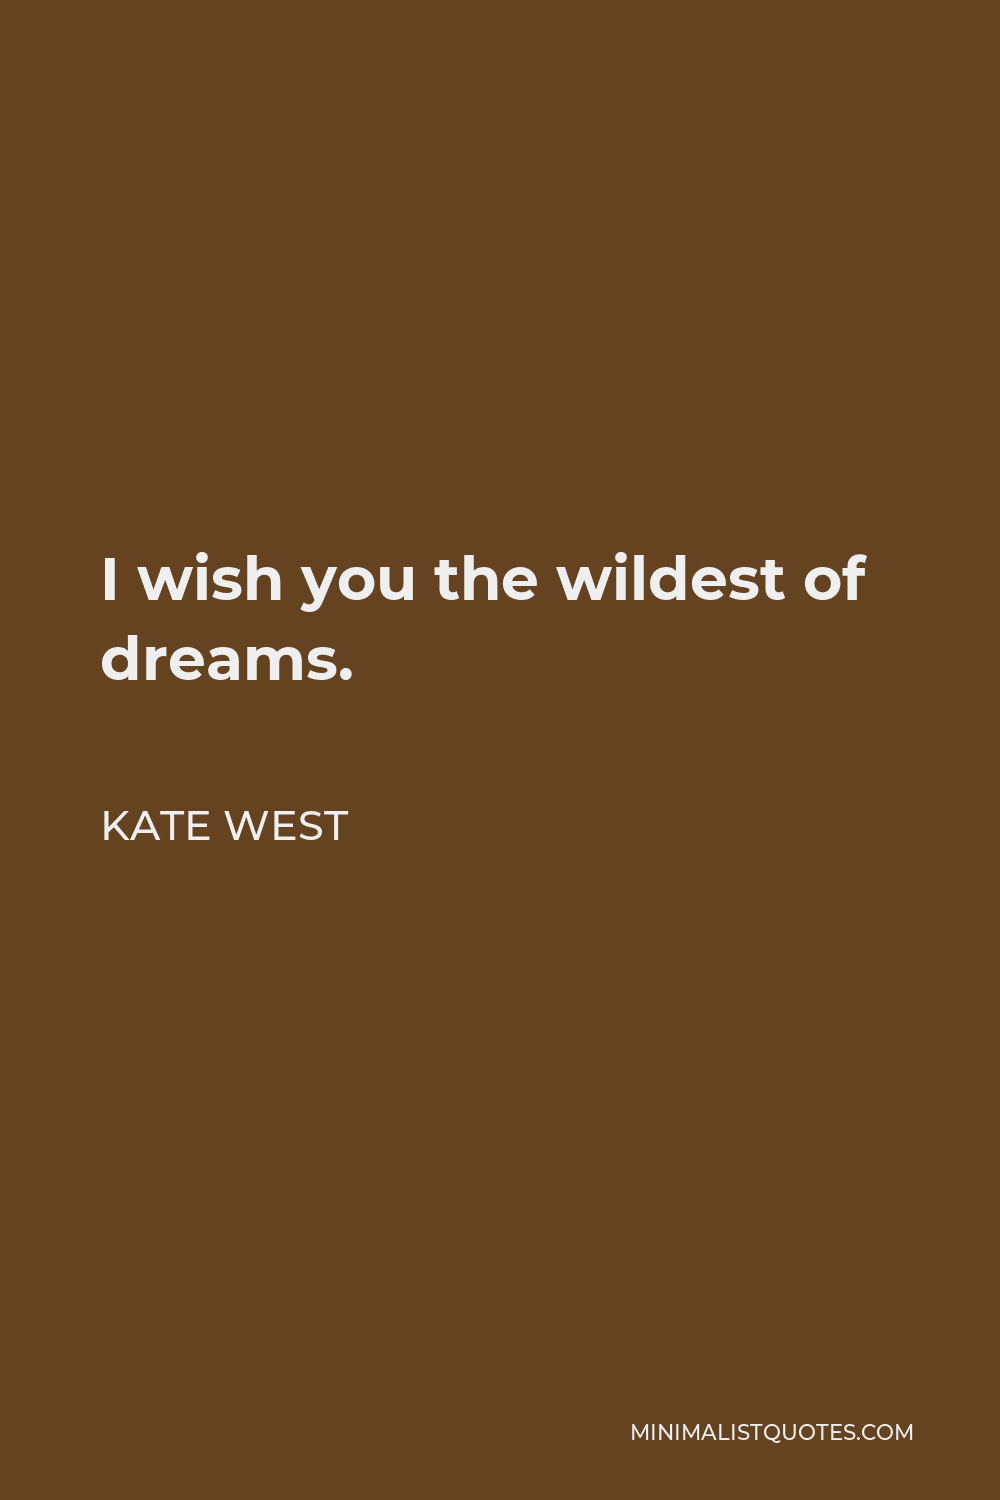 Kate West Quote - I wish you the wildest of dreams.